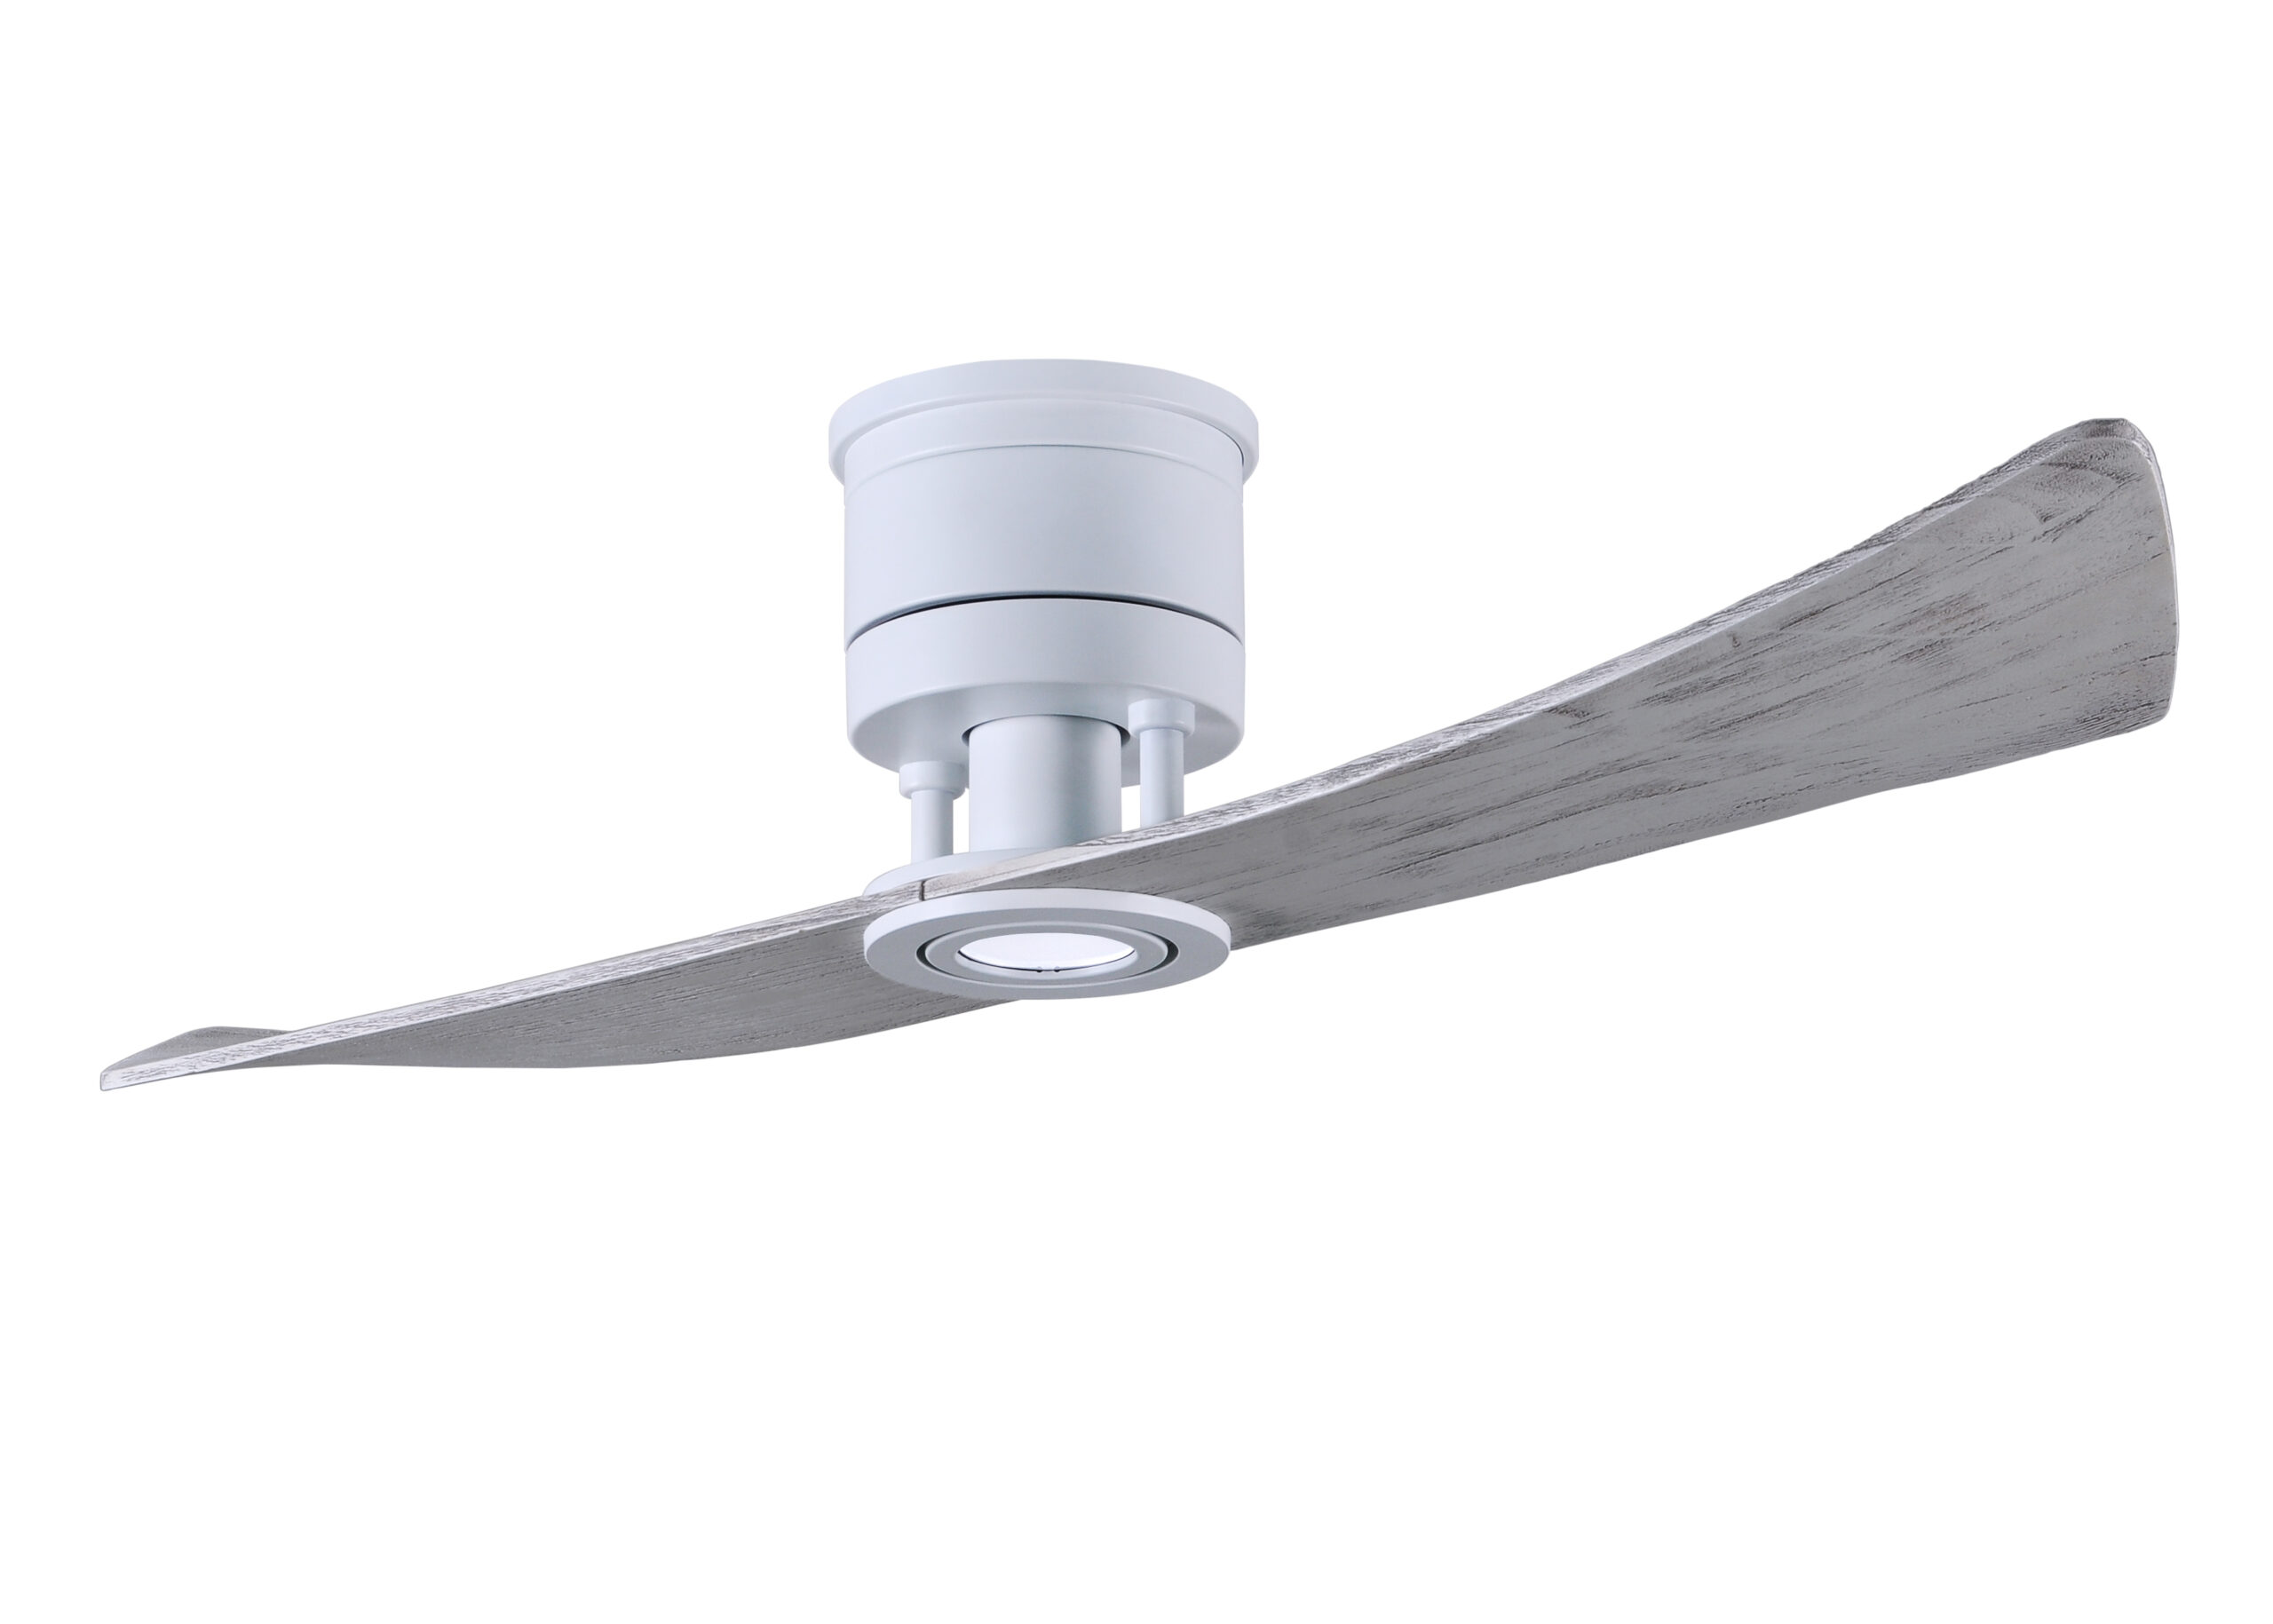 Lindsay 6-speed ceiling fan in Matte White finish with 52